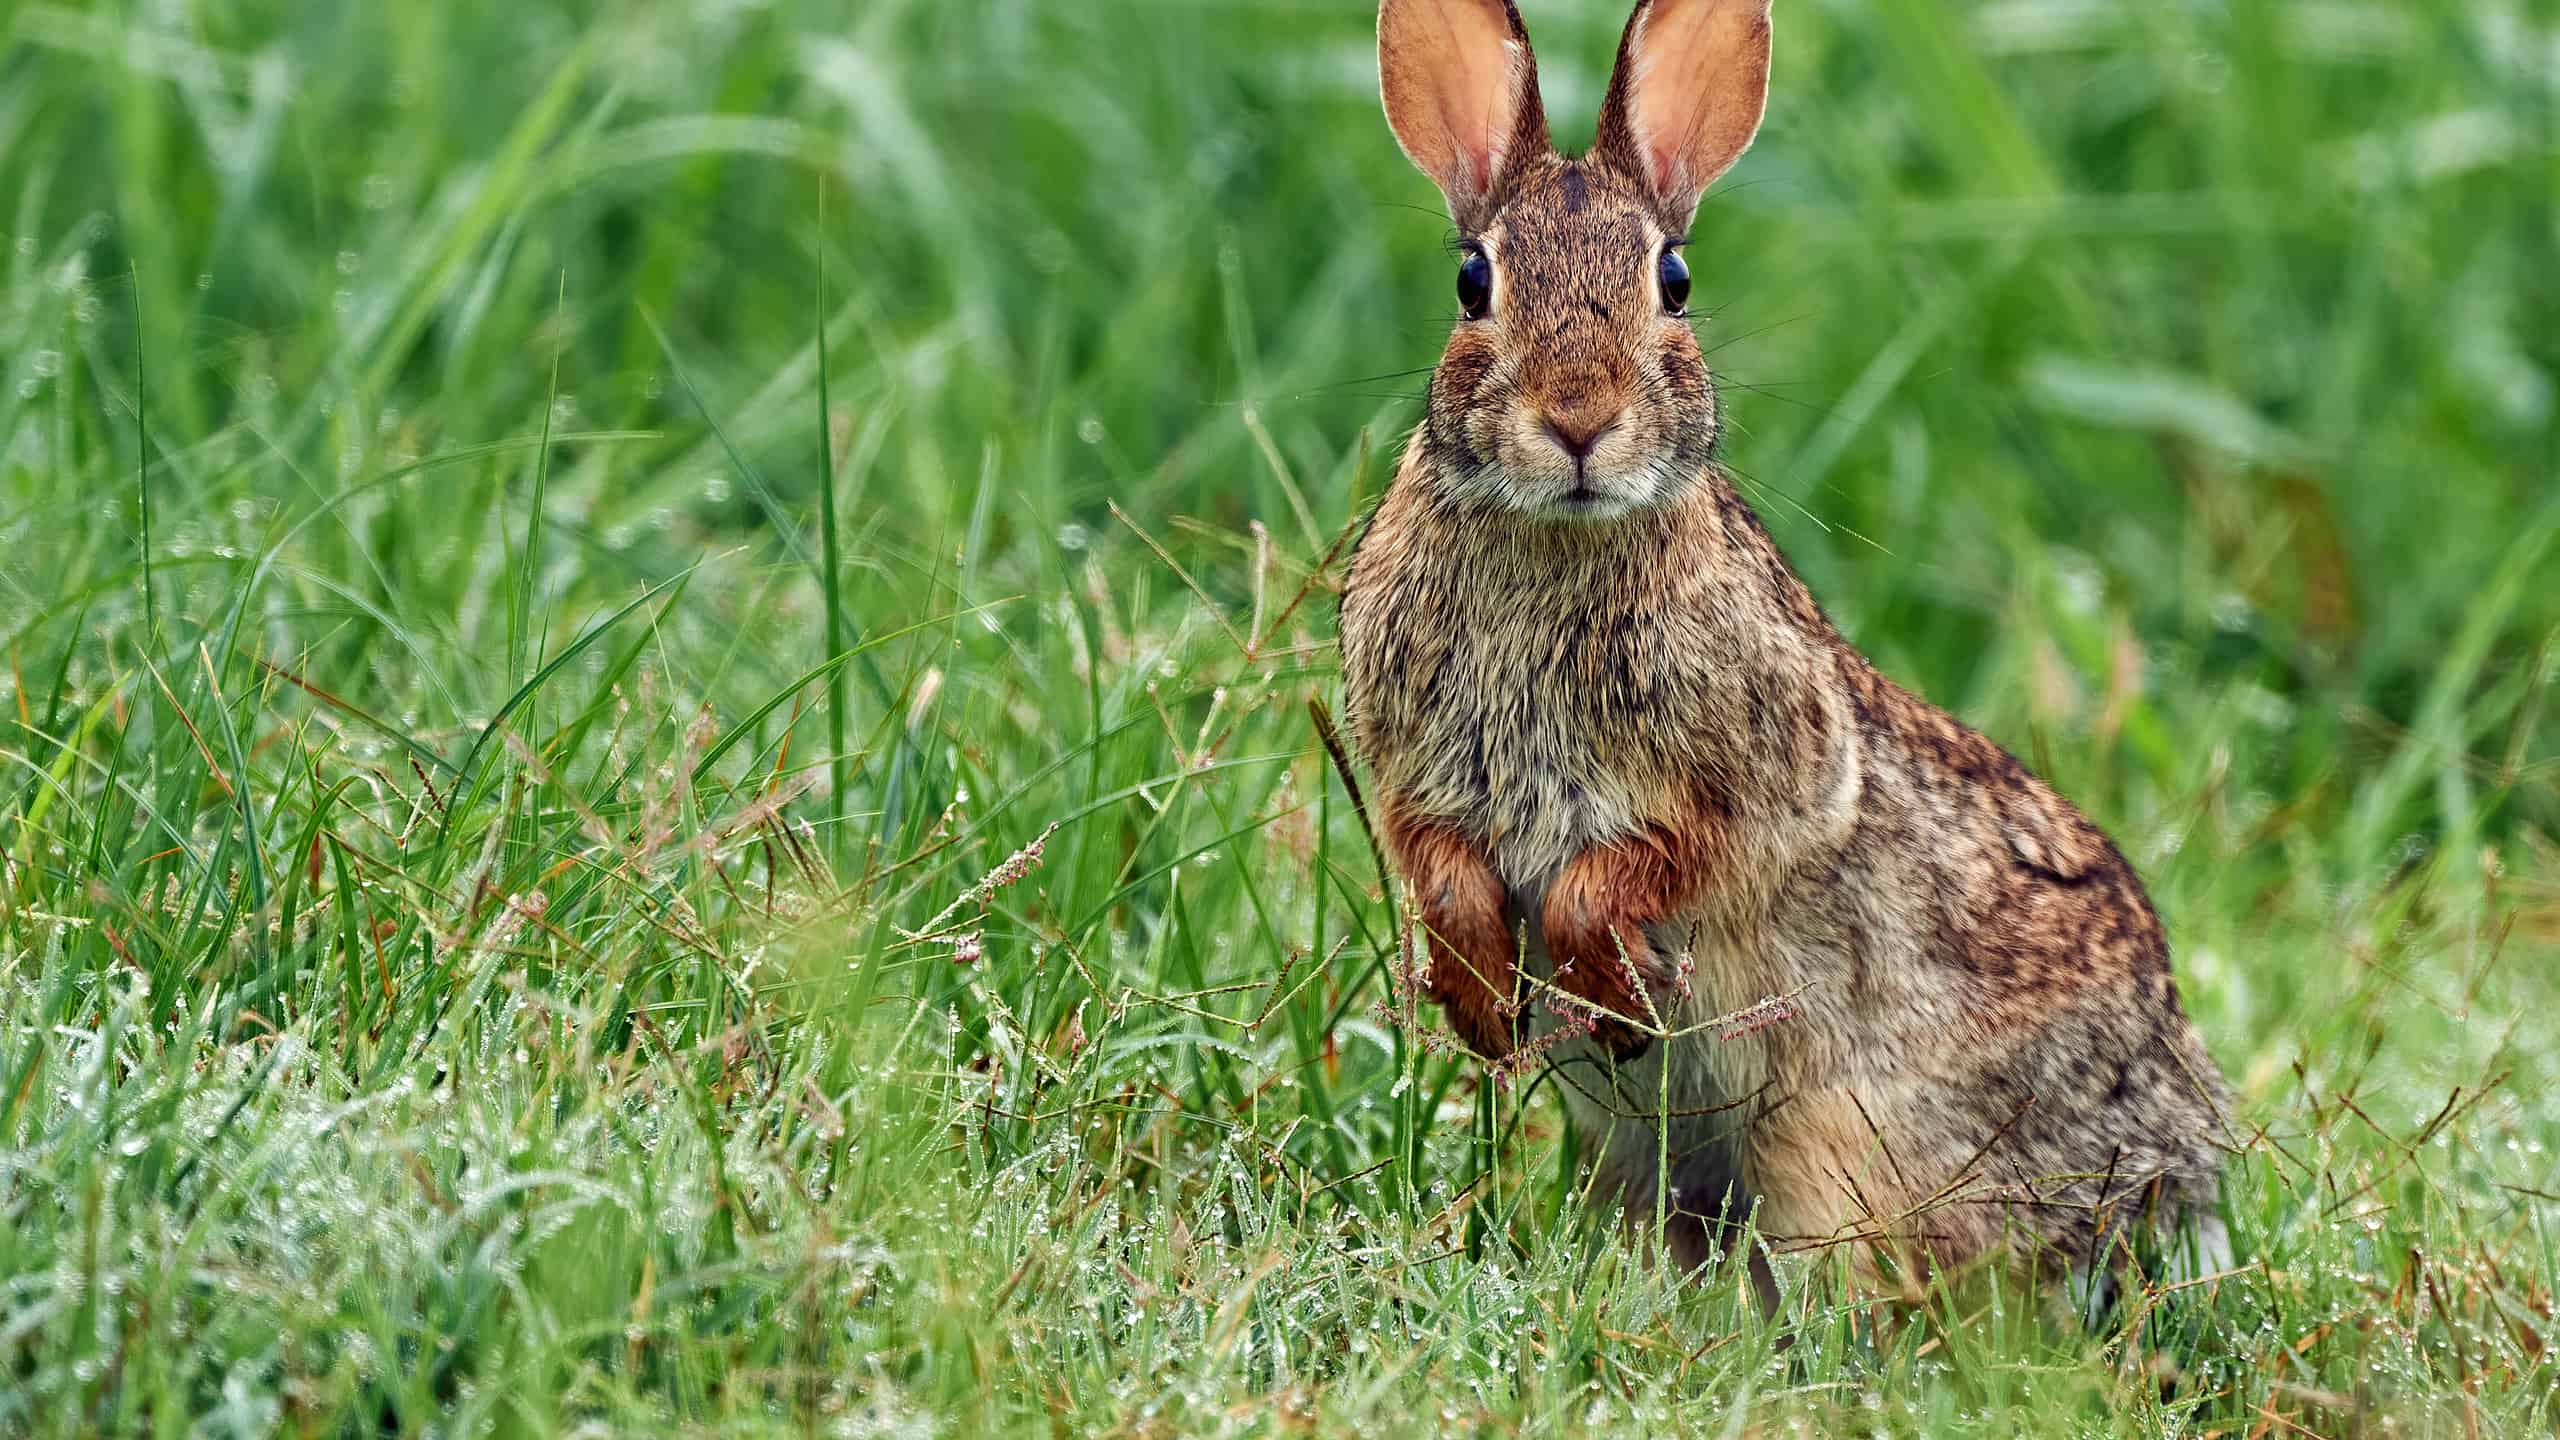 Eastern Cottontail Rabbit in Grass